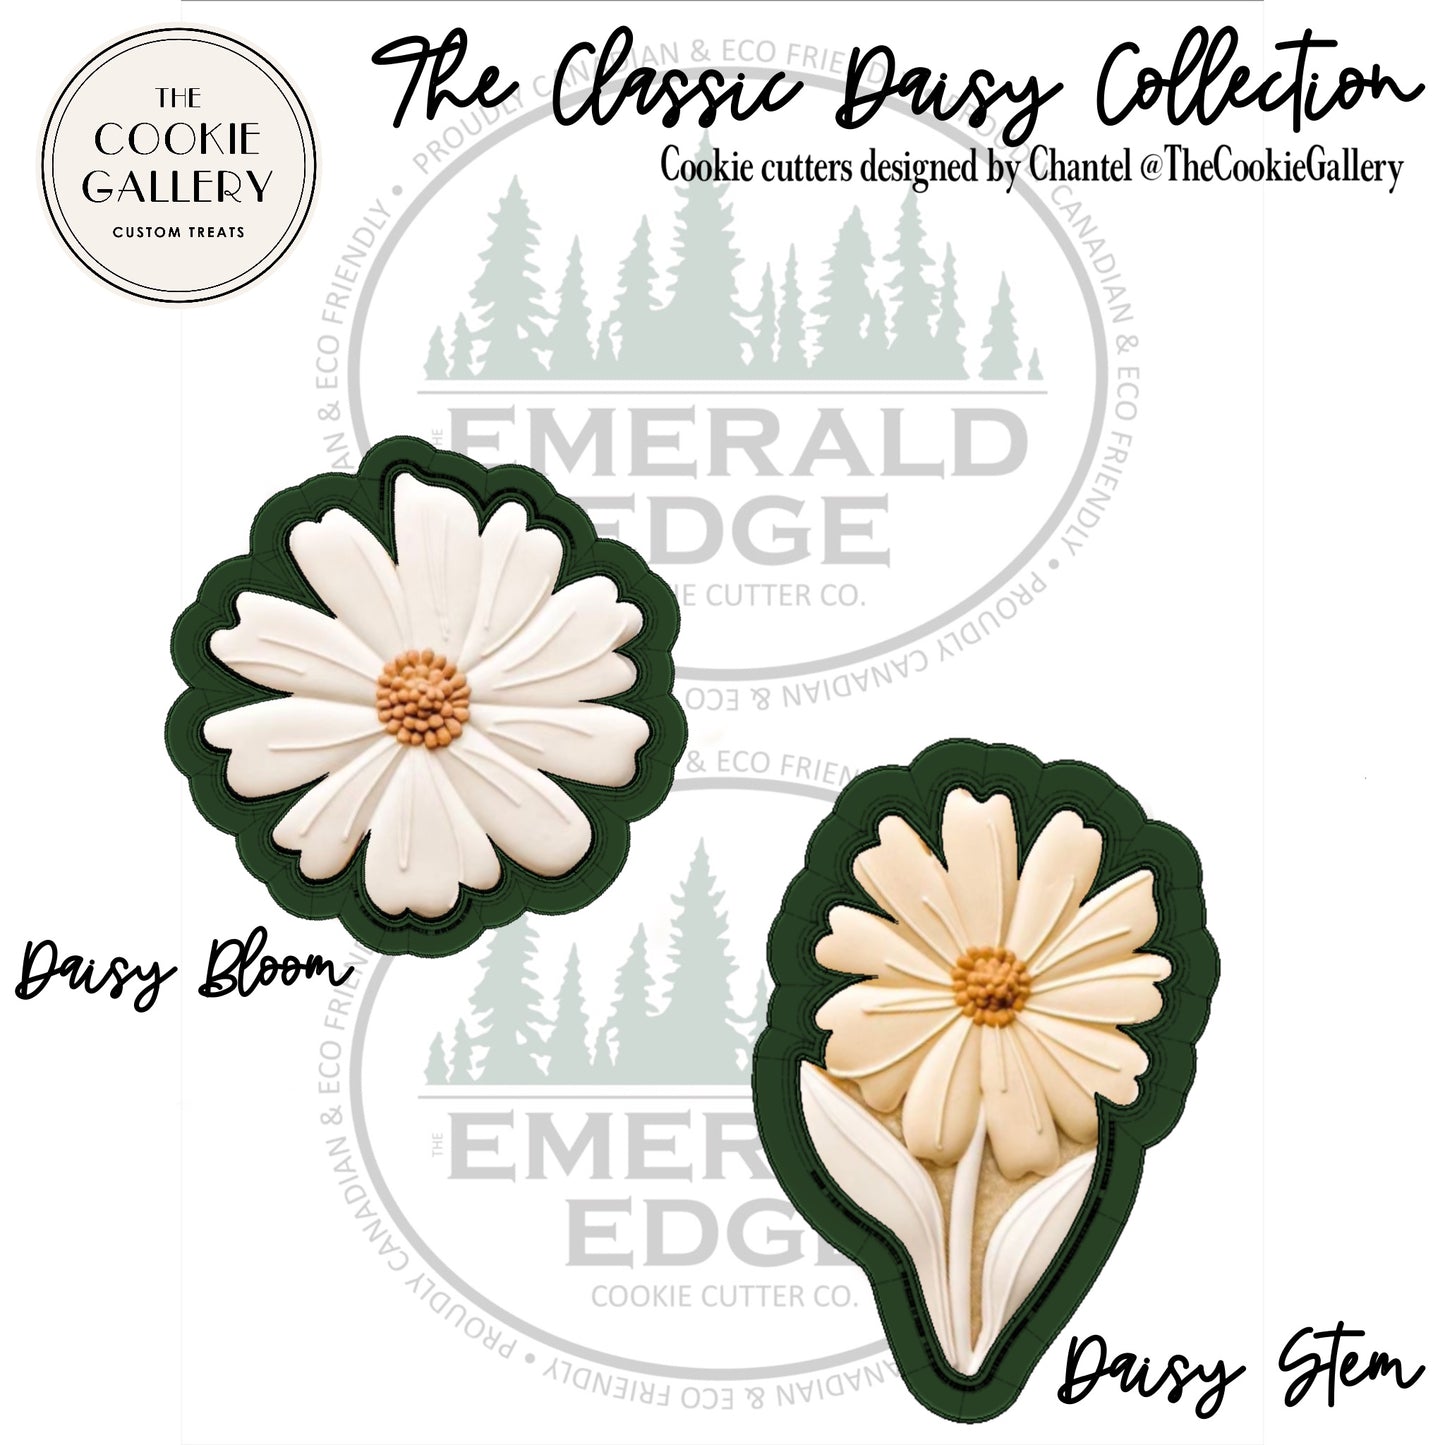 The Classic Daisy Collection - Daisy Bloom